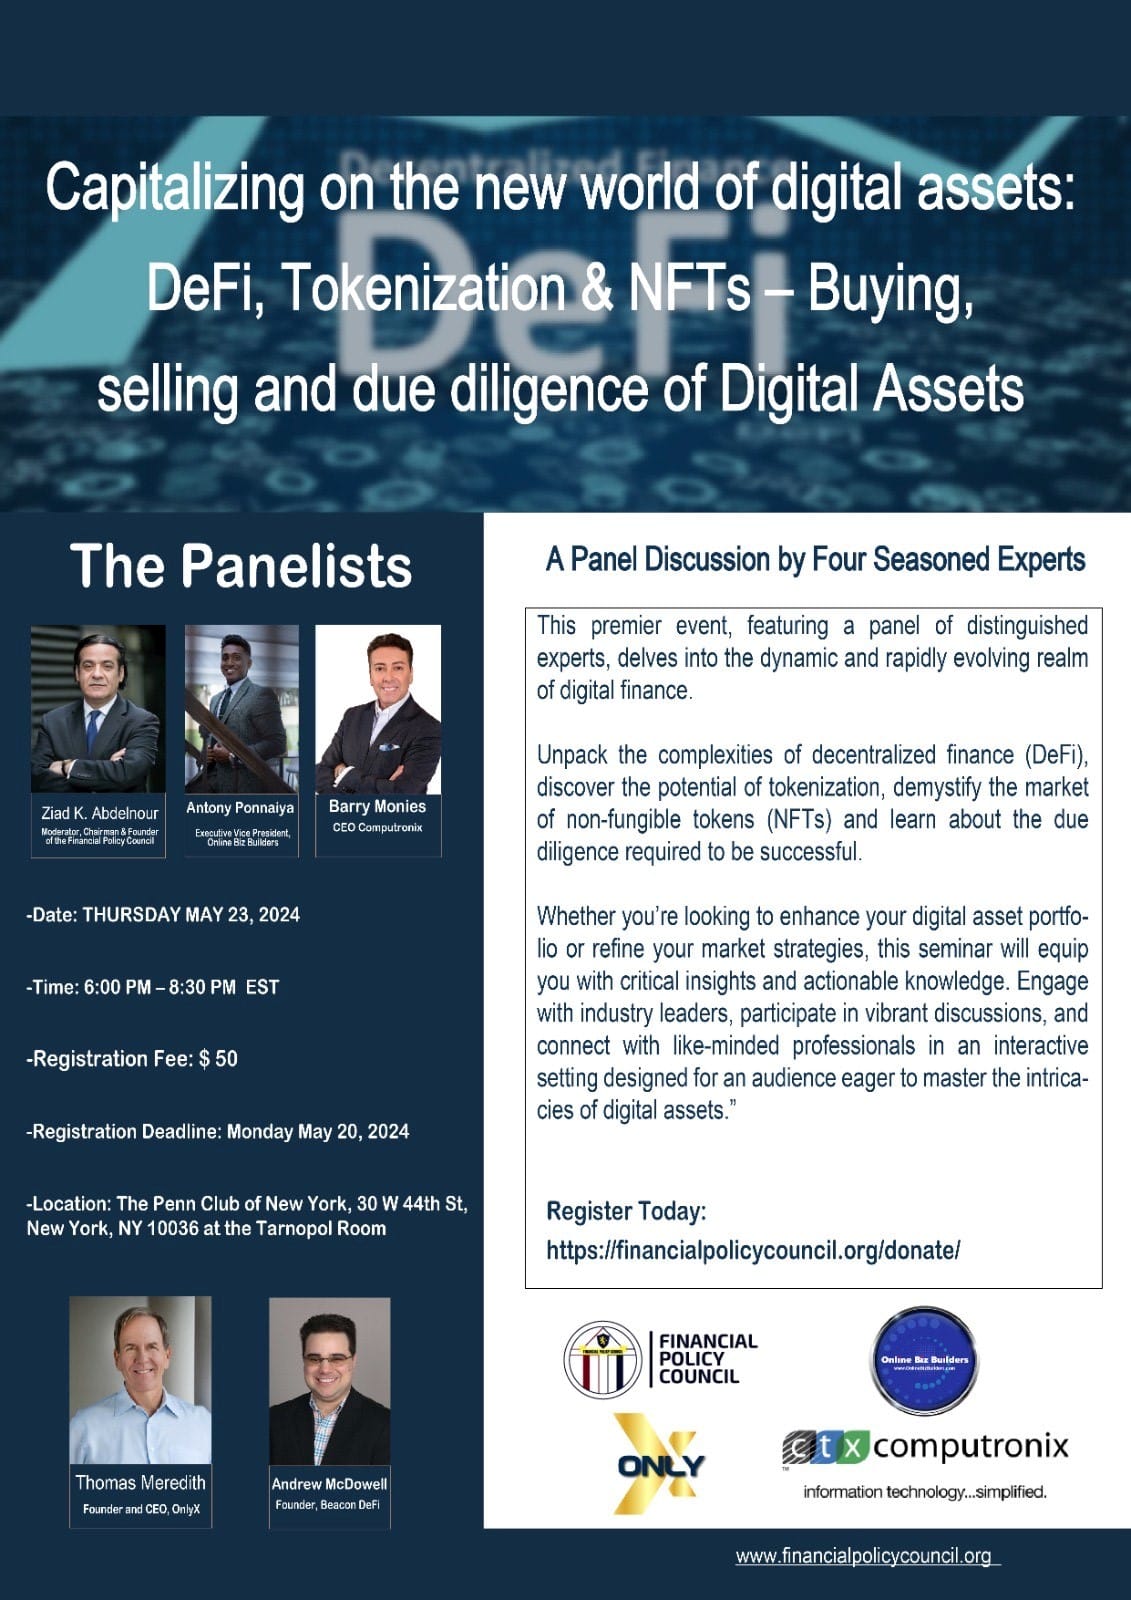 Tom Meredith to Speak at Capitalizing on the New World of Digital Assets